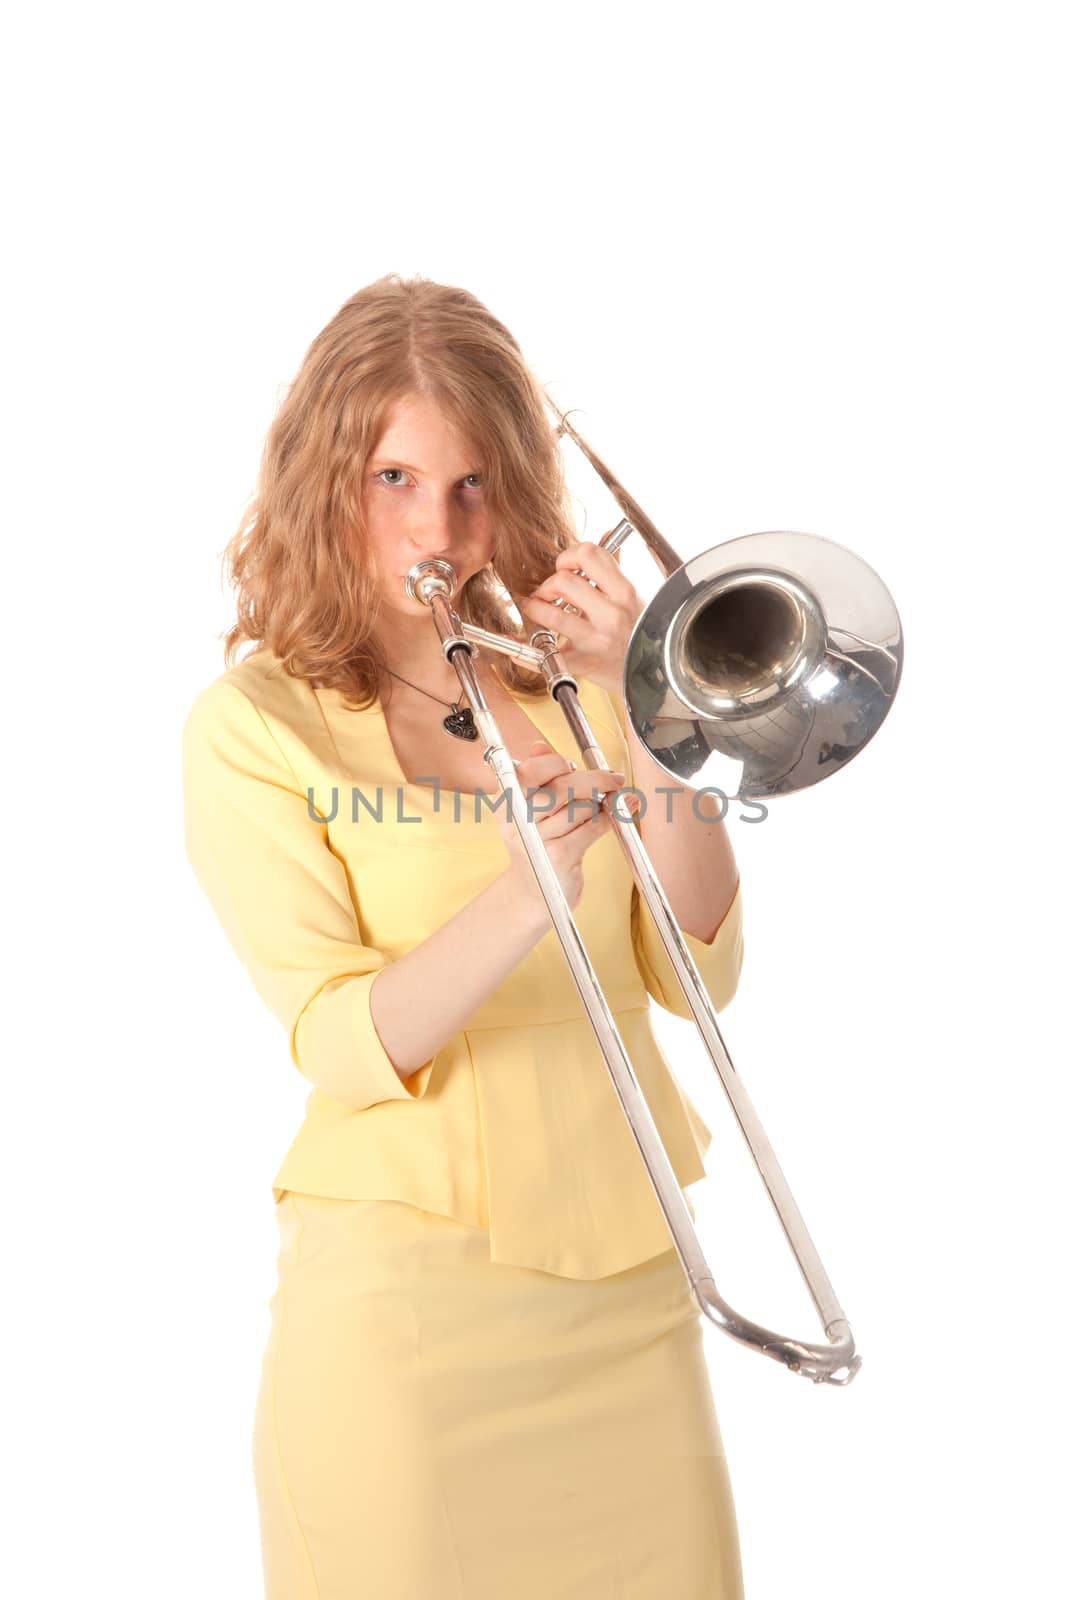 young woman in yellow holding trombone and white background